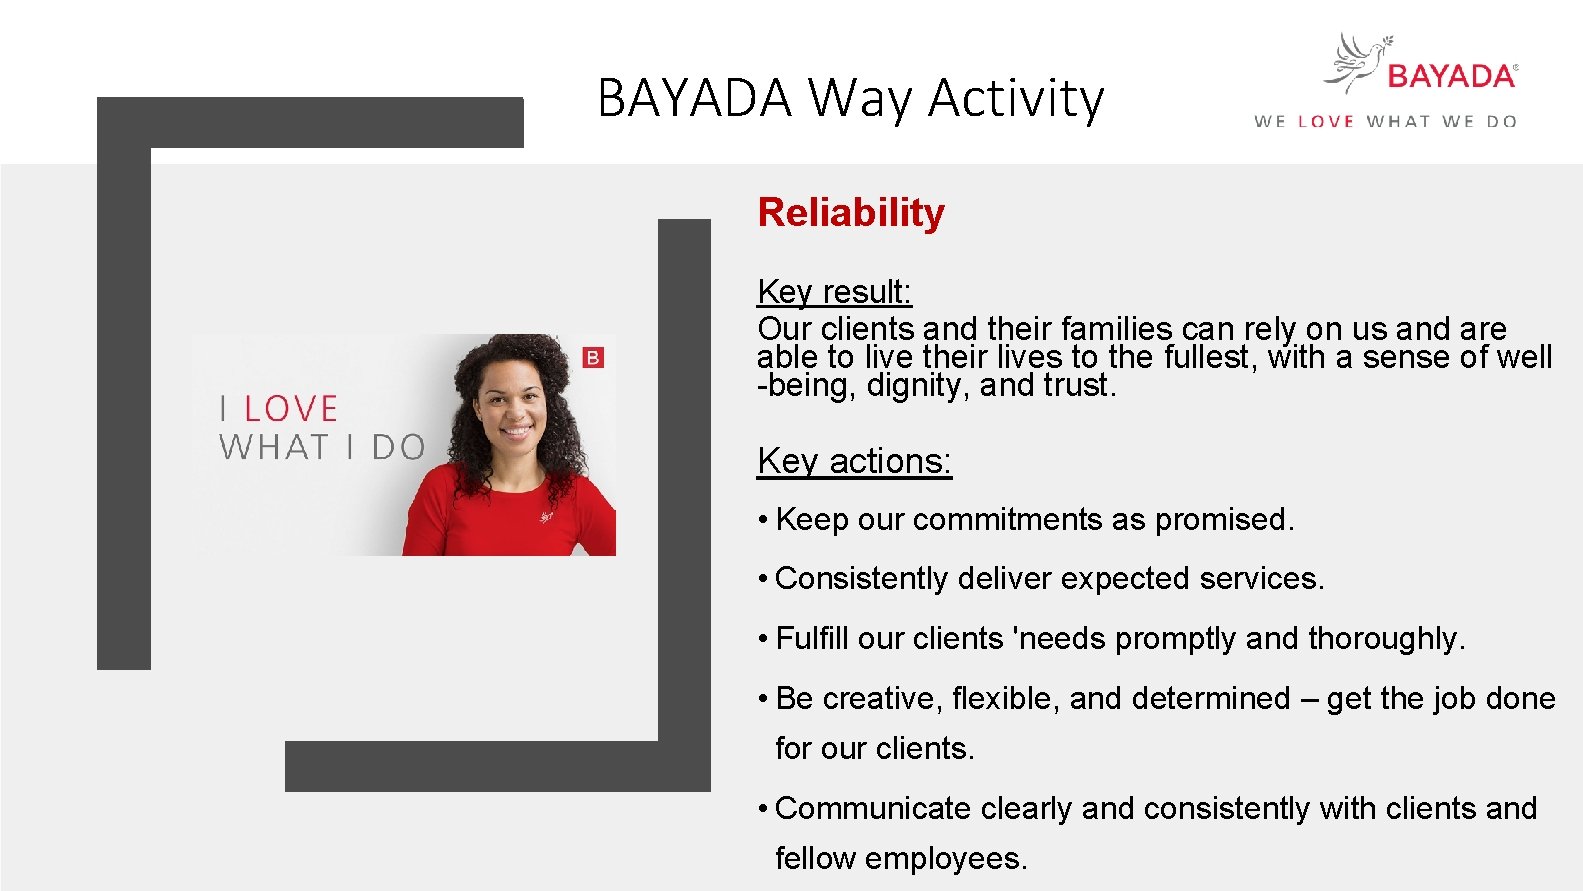 BAYADA Way Activity Reliability Key result: Our clients and their families can rely on